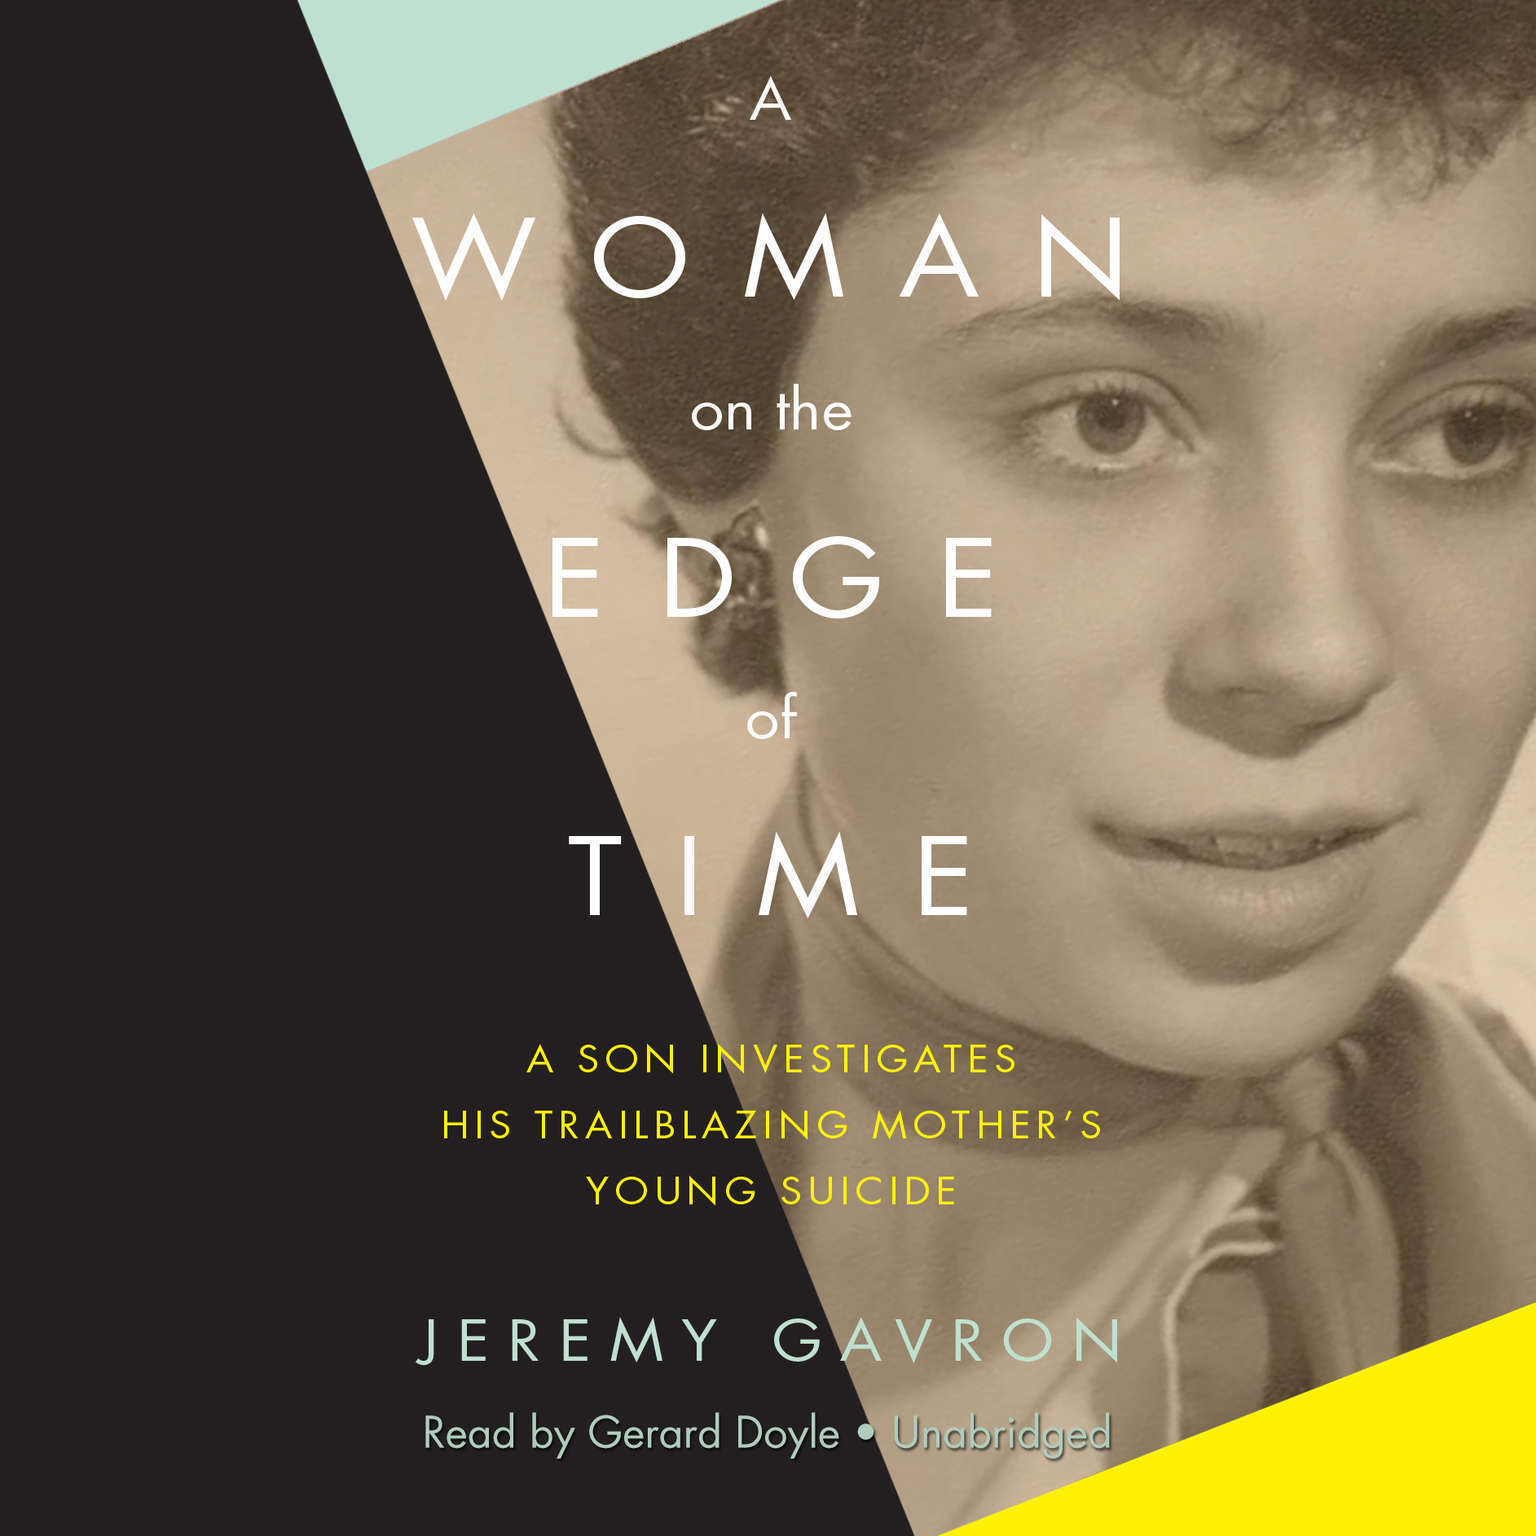 A Woman on the Edge of Time by Jeremy Gavron 2016 Unabridged CD 9781504796149